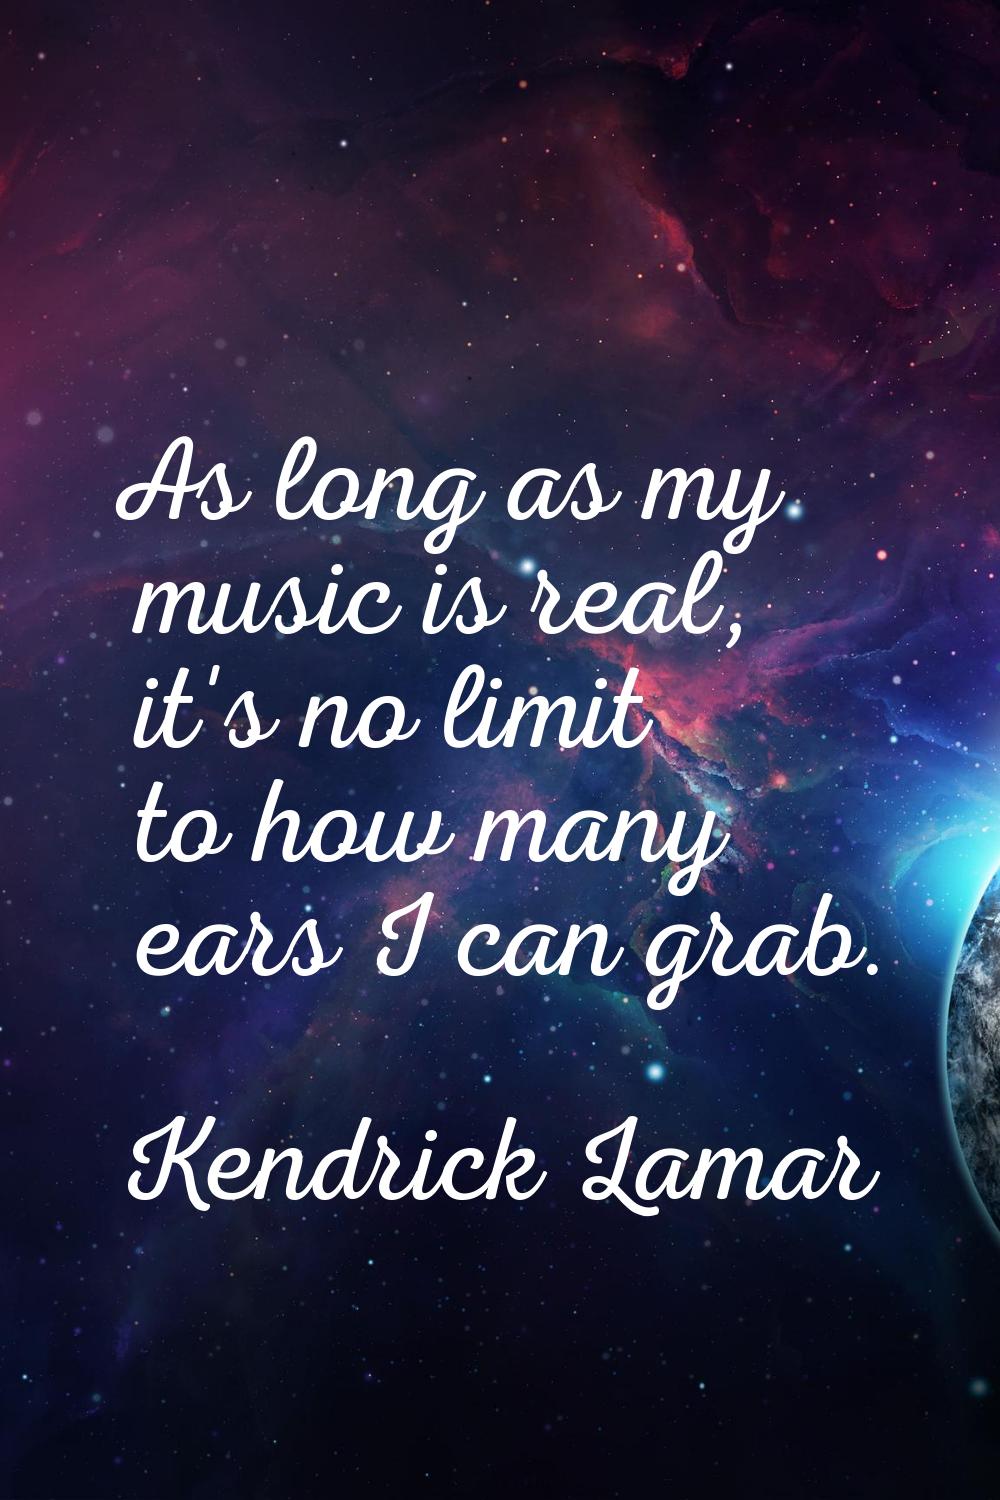 As long as my music is real, it's no limit to how many ears I can grab.